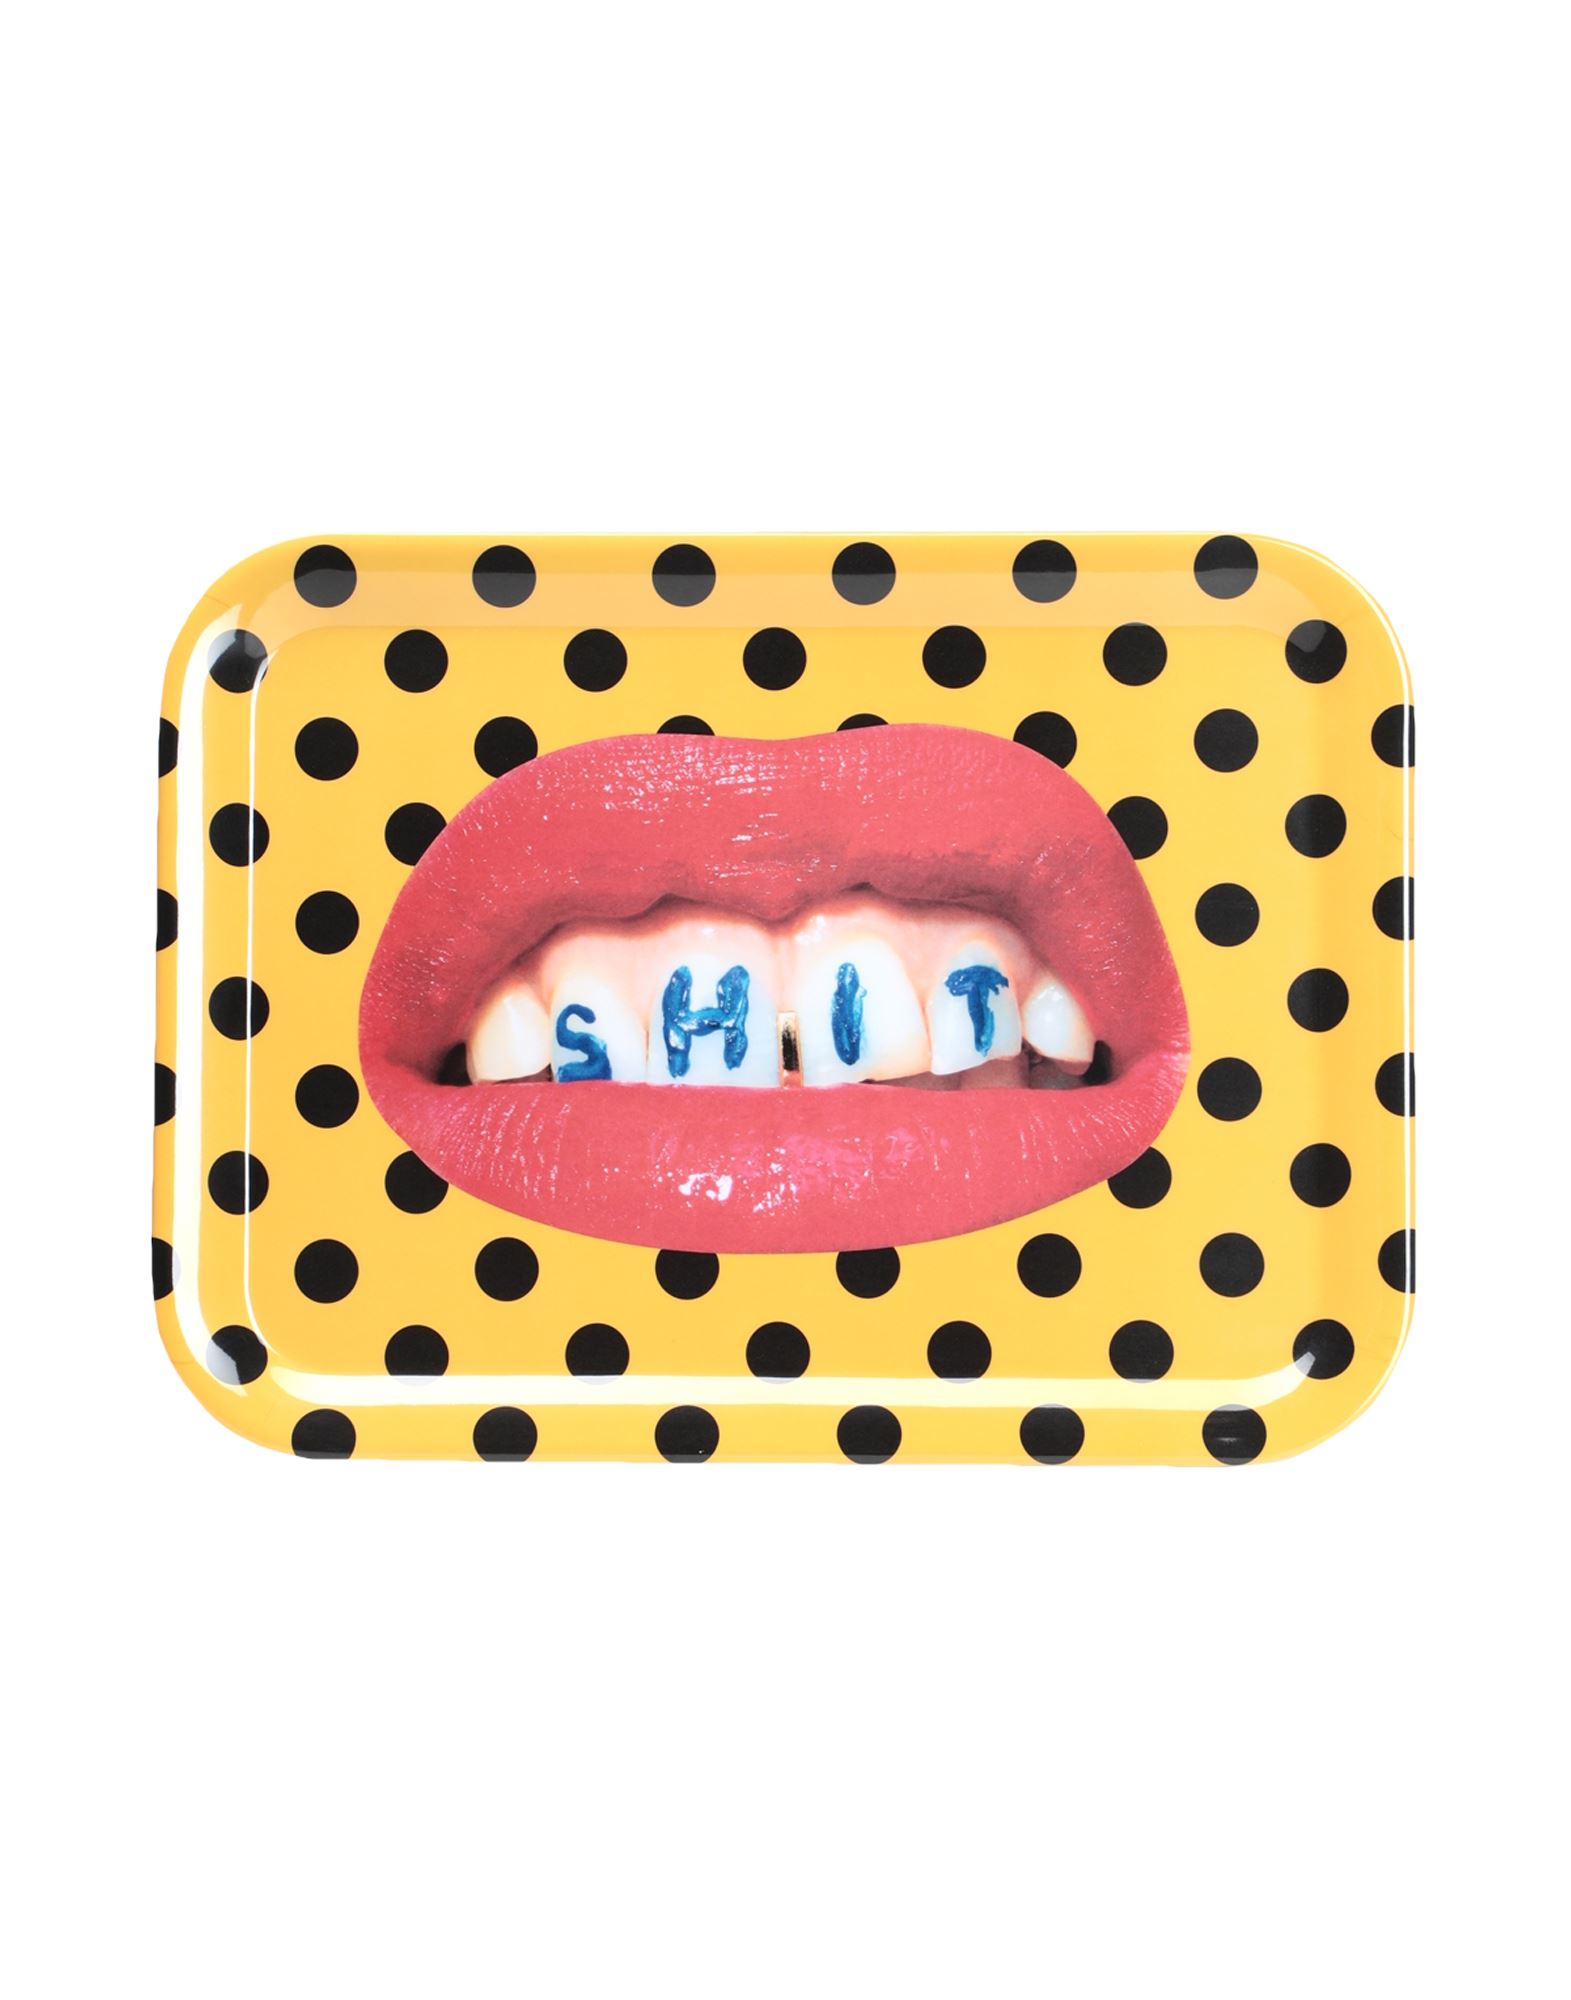 Seletti Wears Toiletpaper Trays And Serving Plates In Yellow